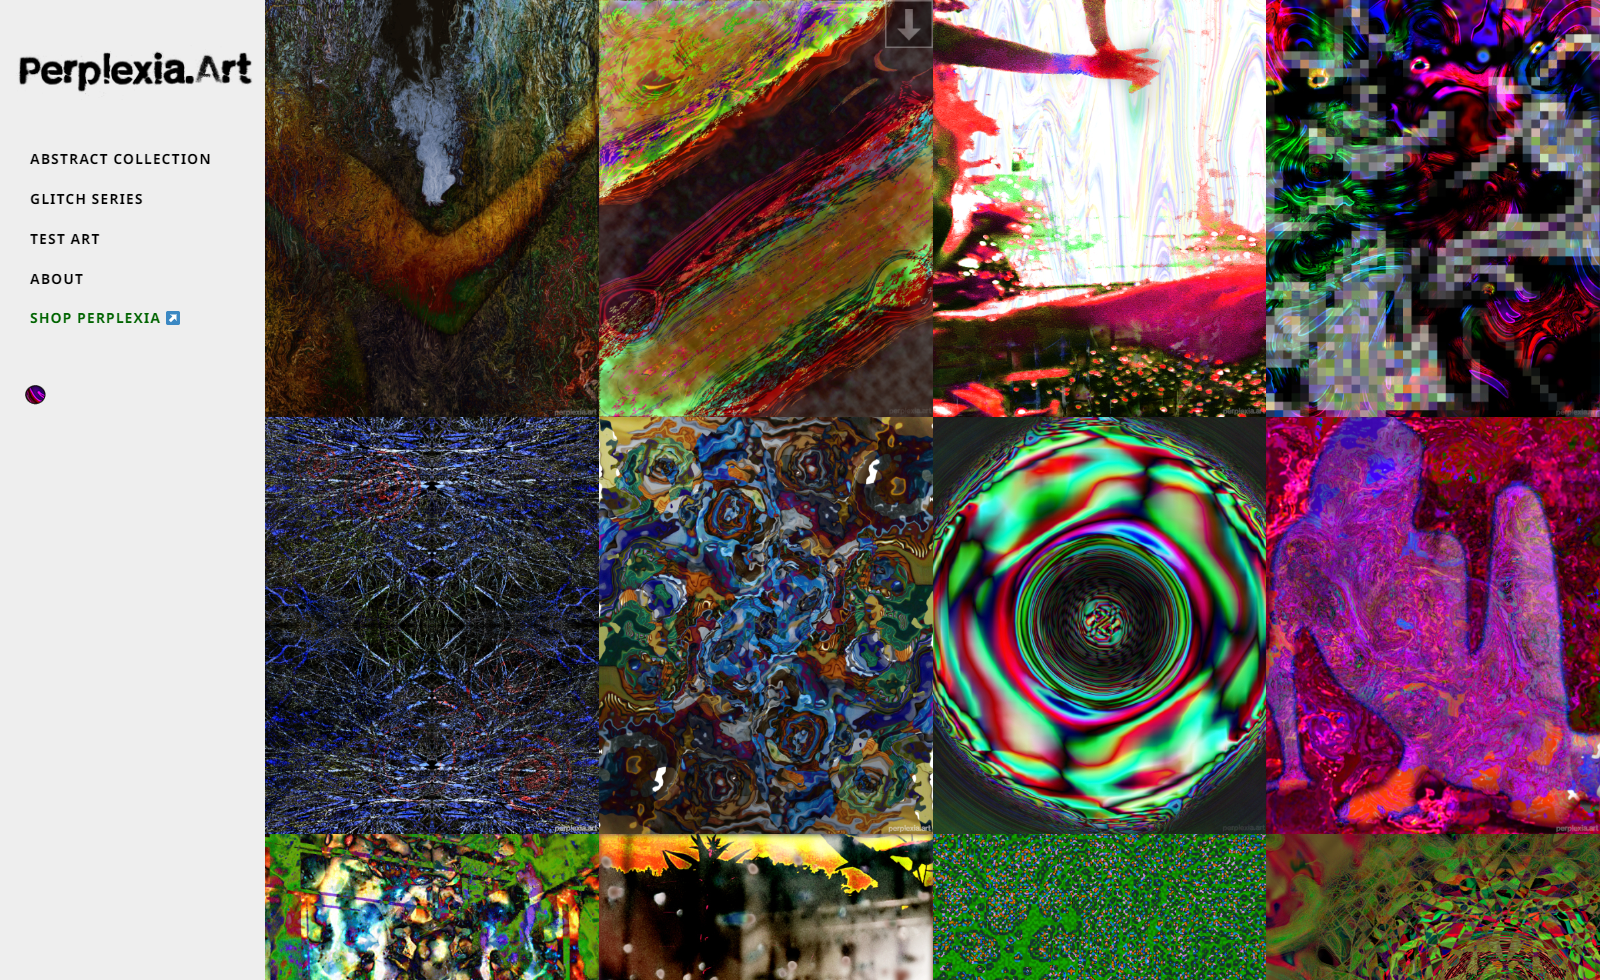 The Perplexia abstract gallery.